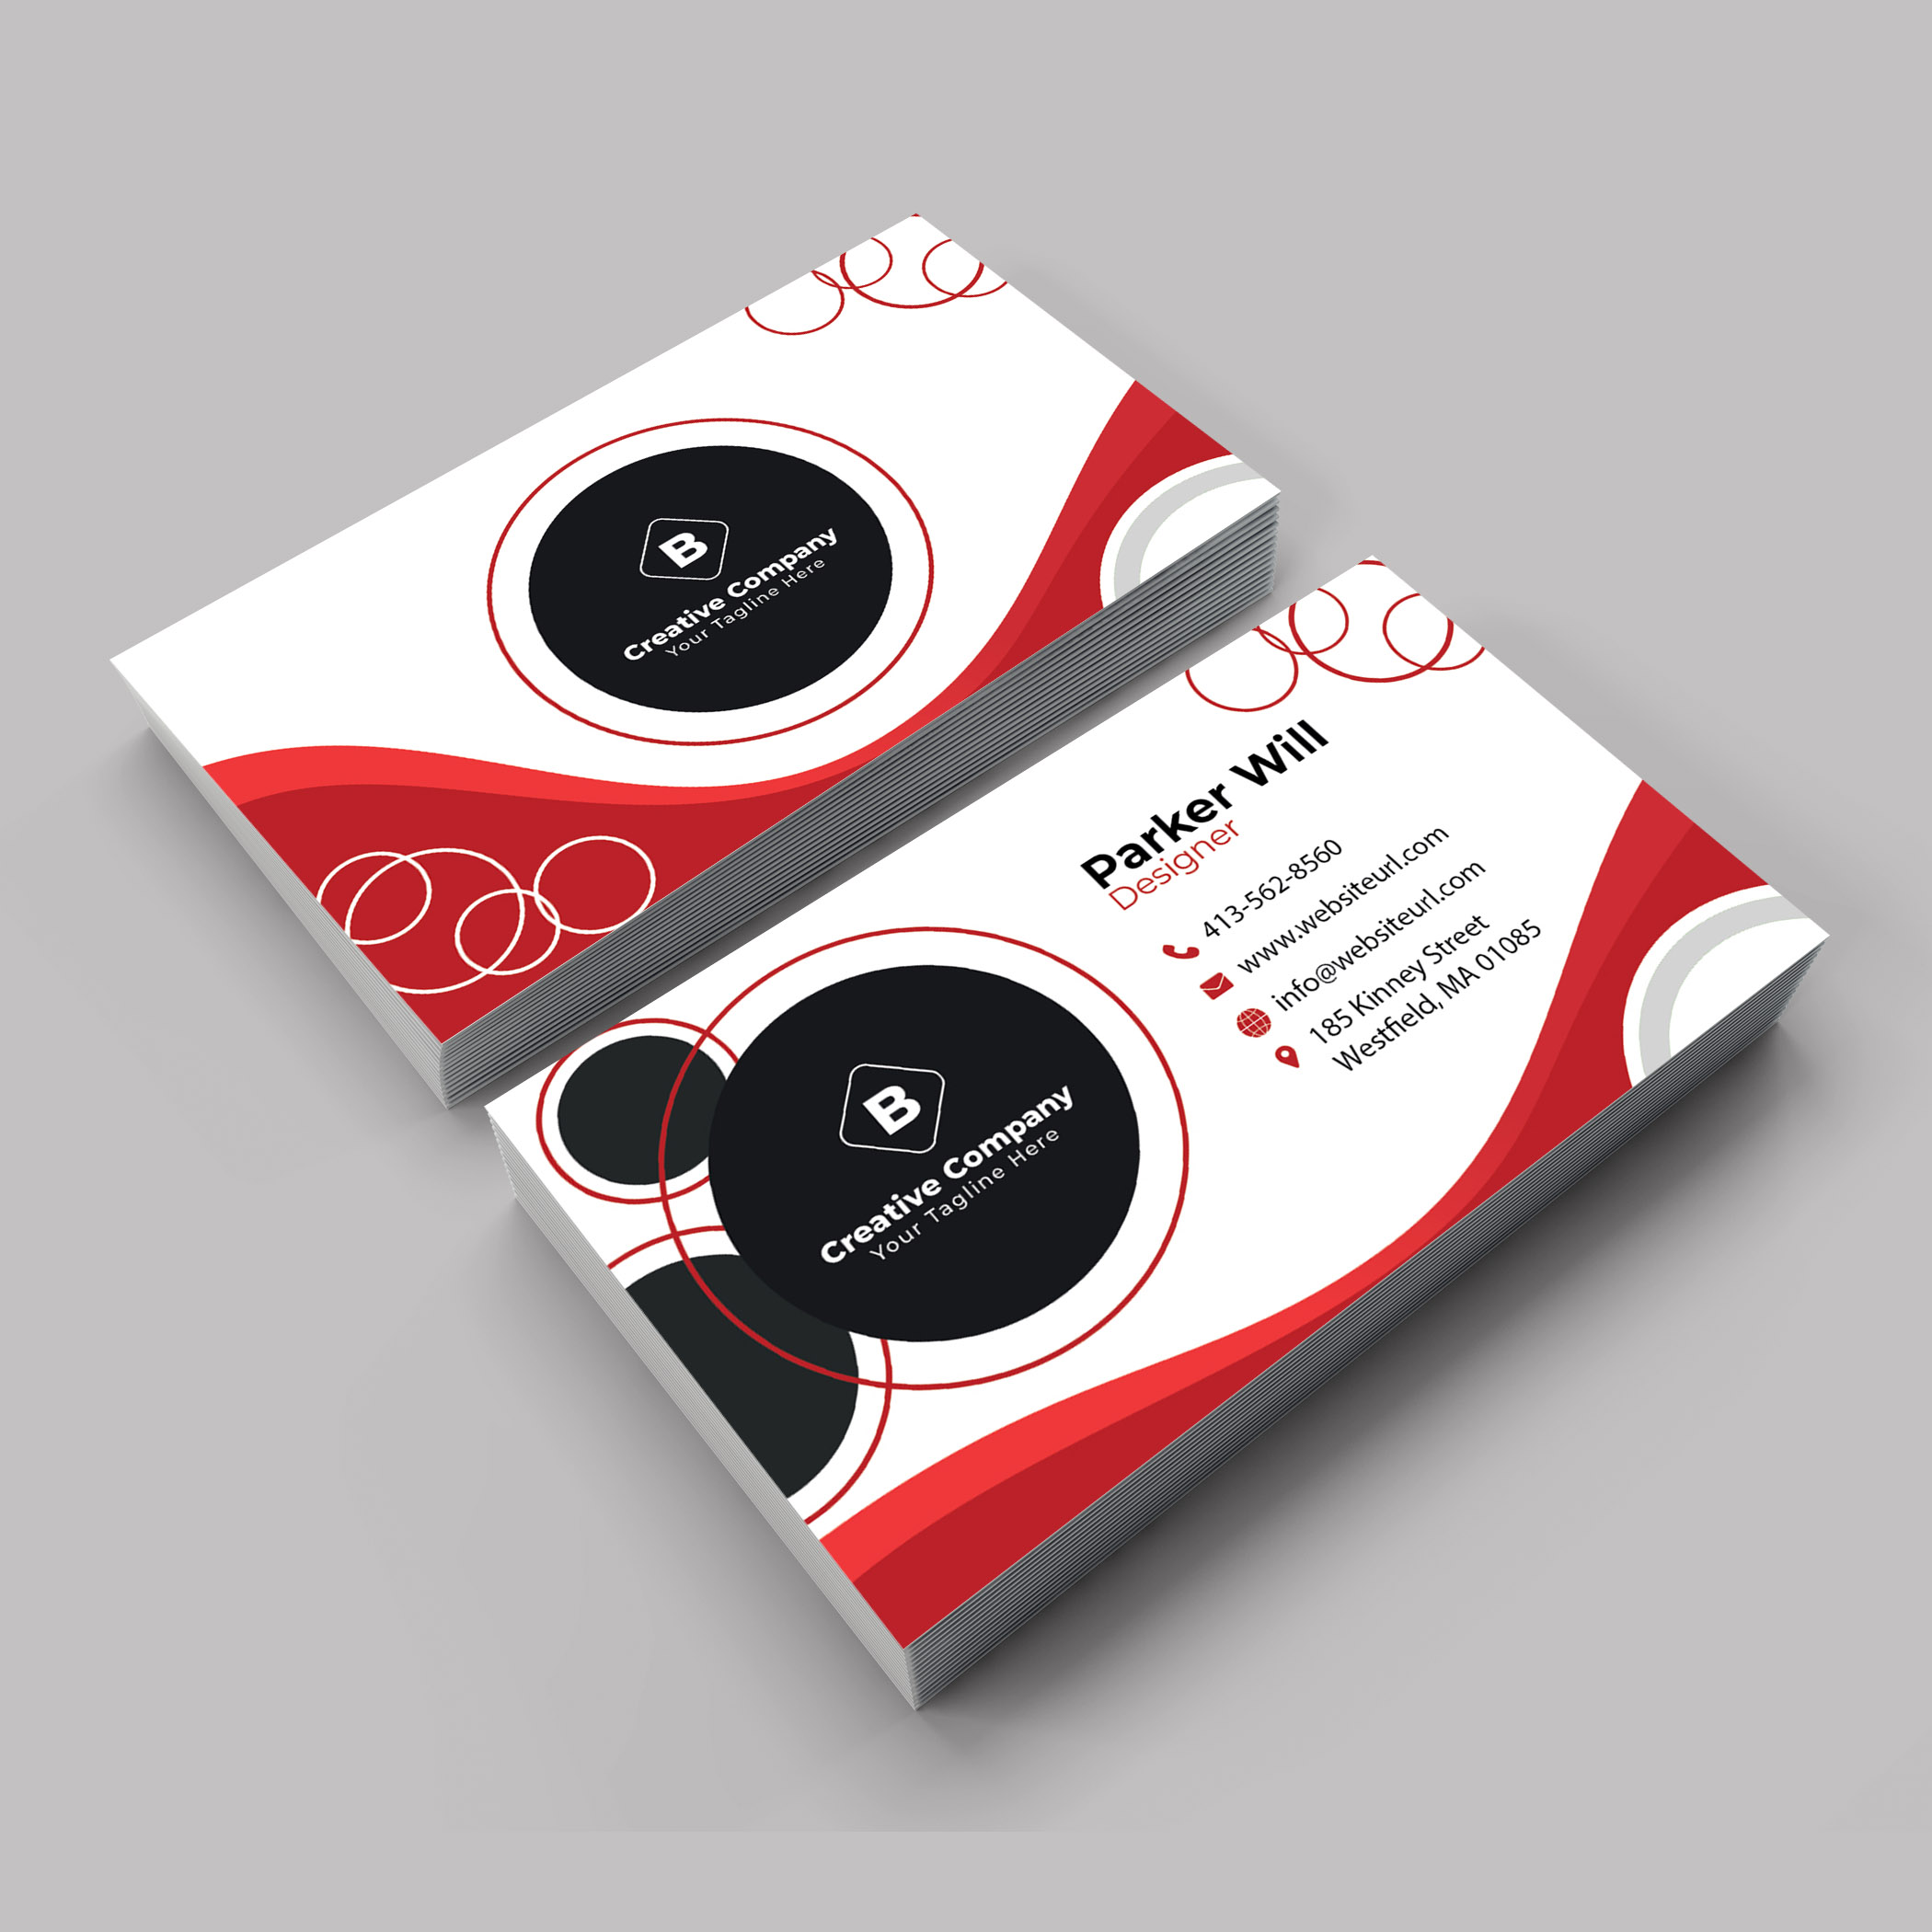 4 Corporate Business Cards Bundle, cards with red design.